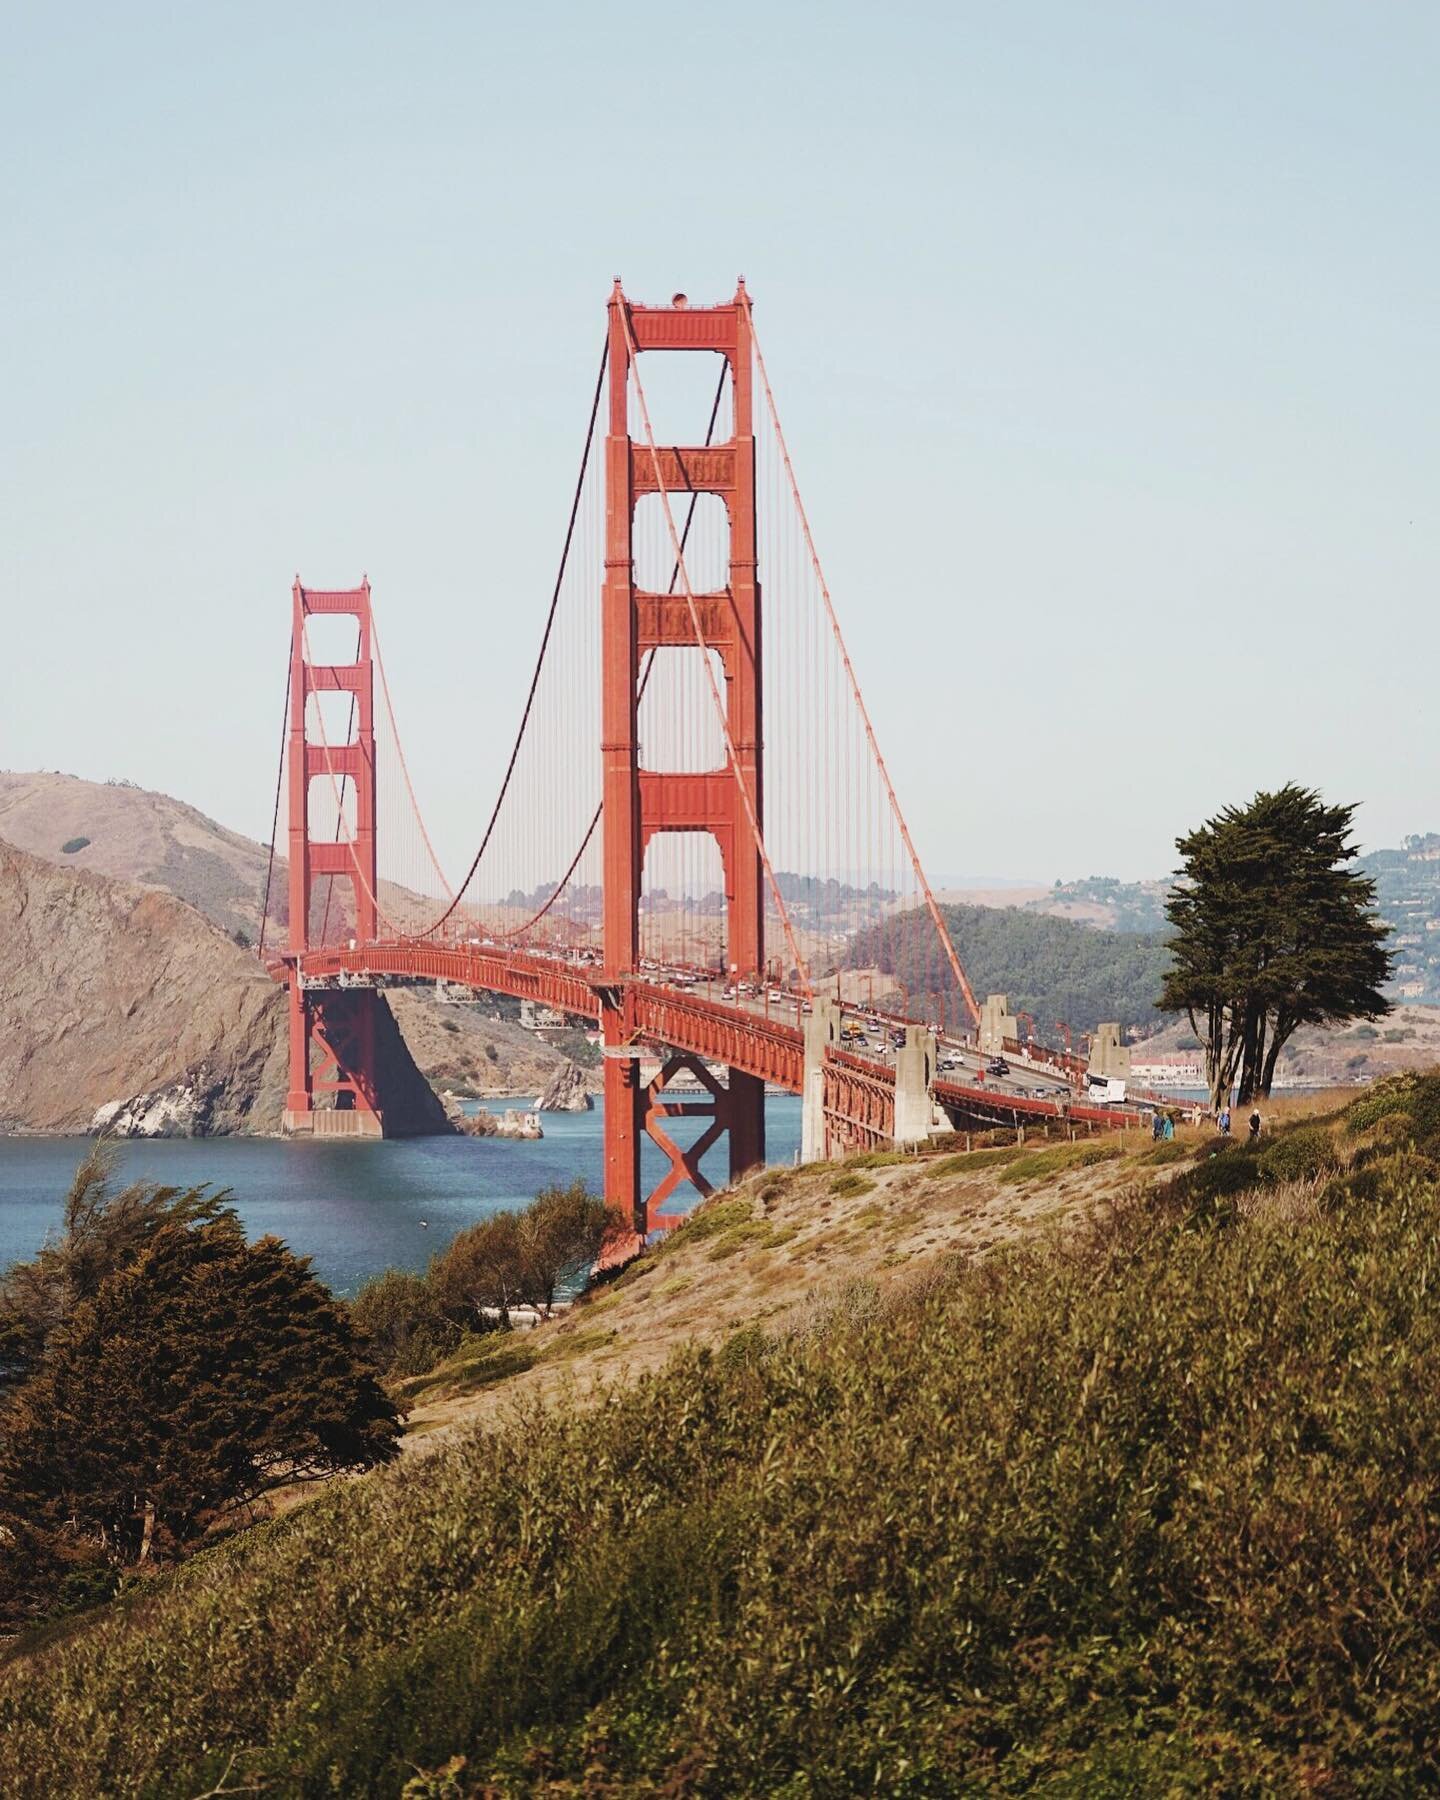 When in San Francisco, I find myself completely hypnotised by the Golden Gate Bridge, with that eye-pleasing shade of red, its Art Deco design and the natural beauty of its surroundings. In my opinion, it is truly a man-made wonder. 🌁❤️ (It's been t